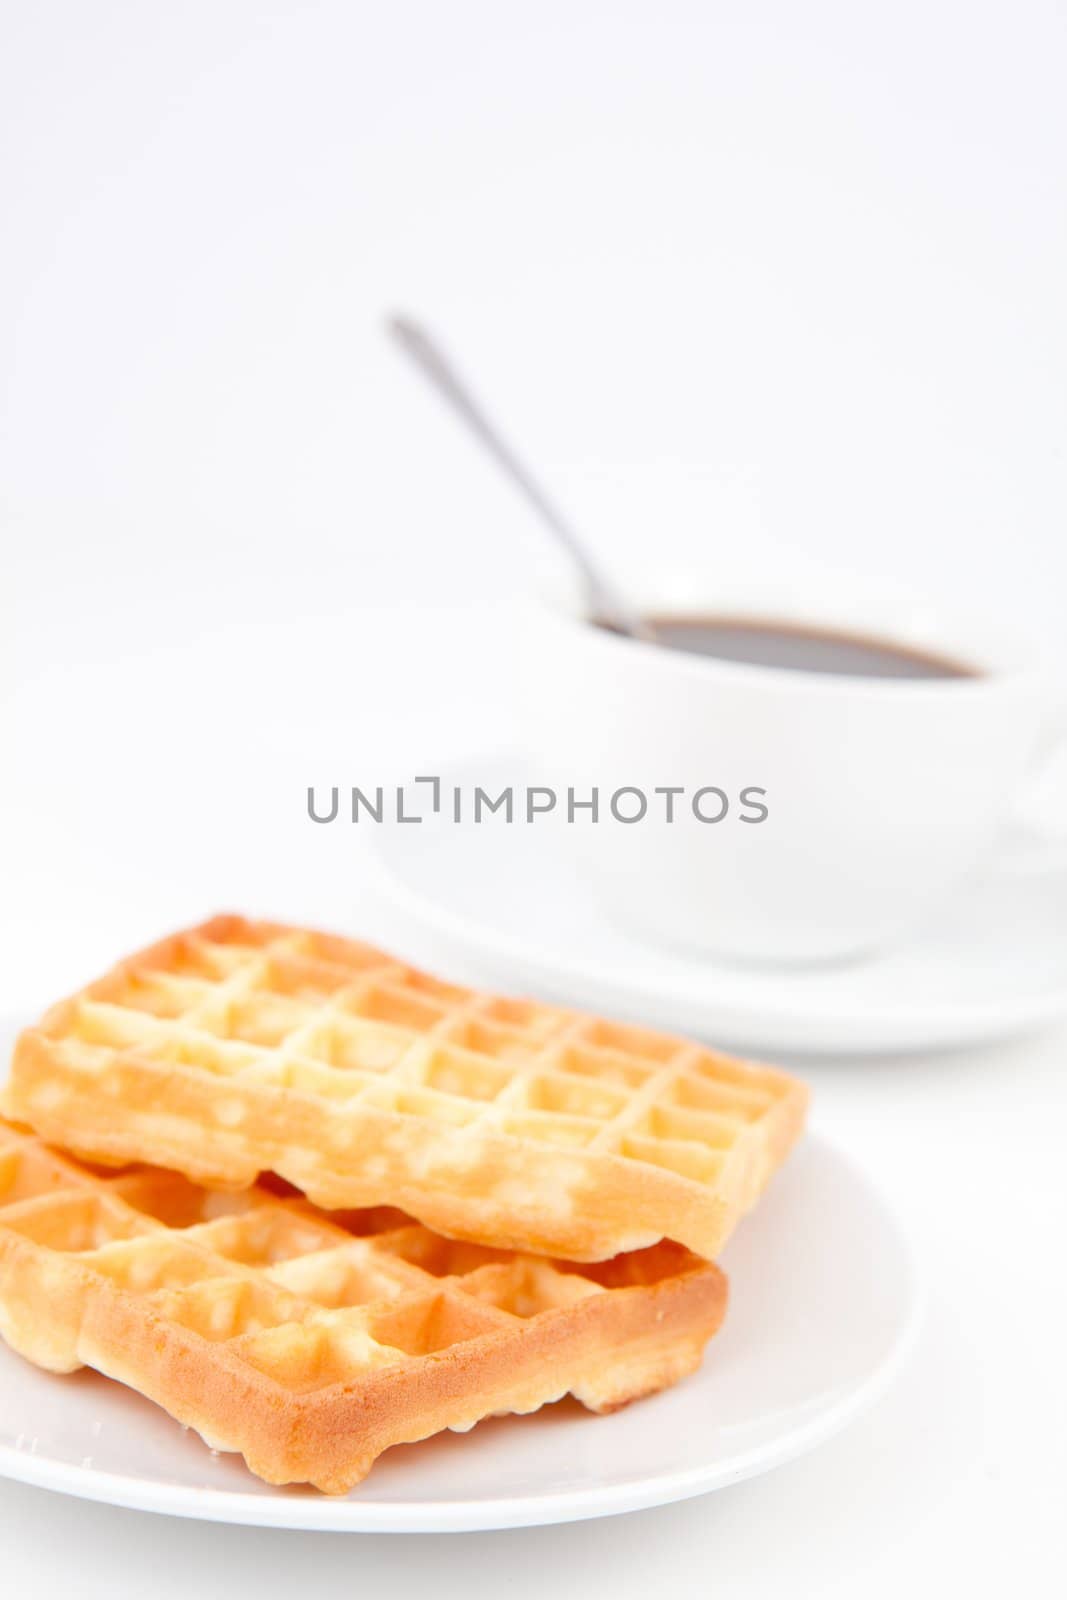 Waffles and a cup of coffee with a spoon on white plates against a white background